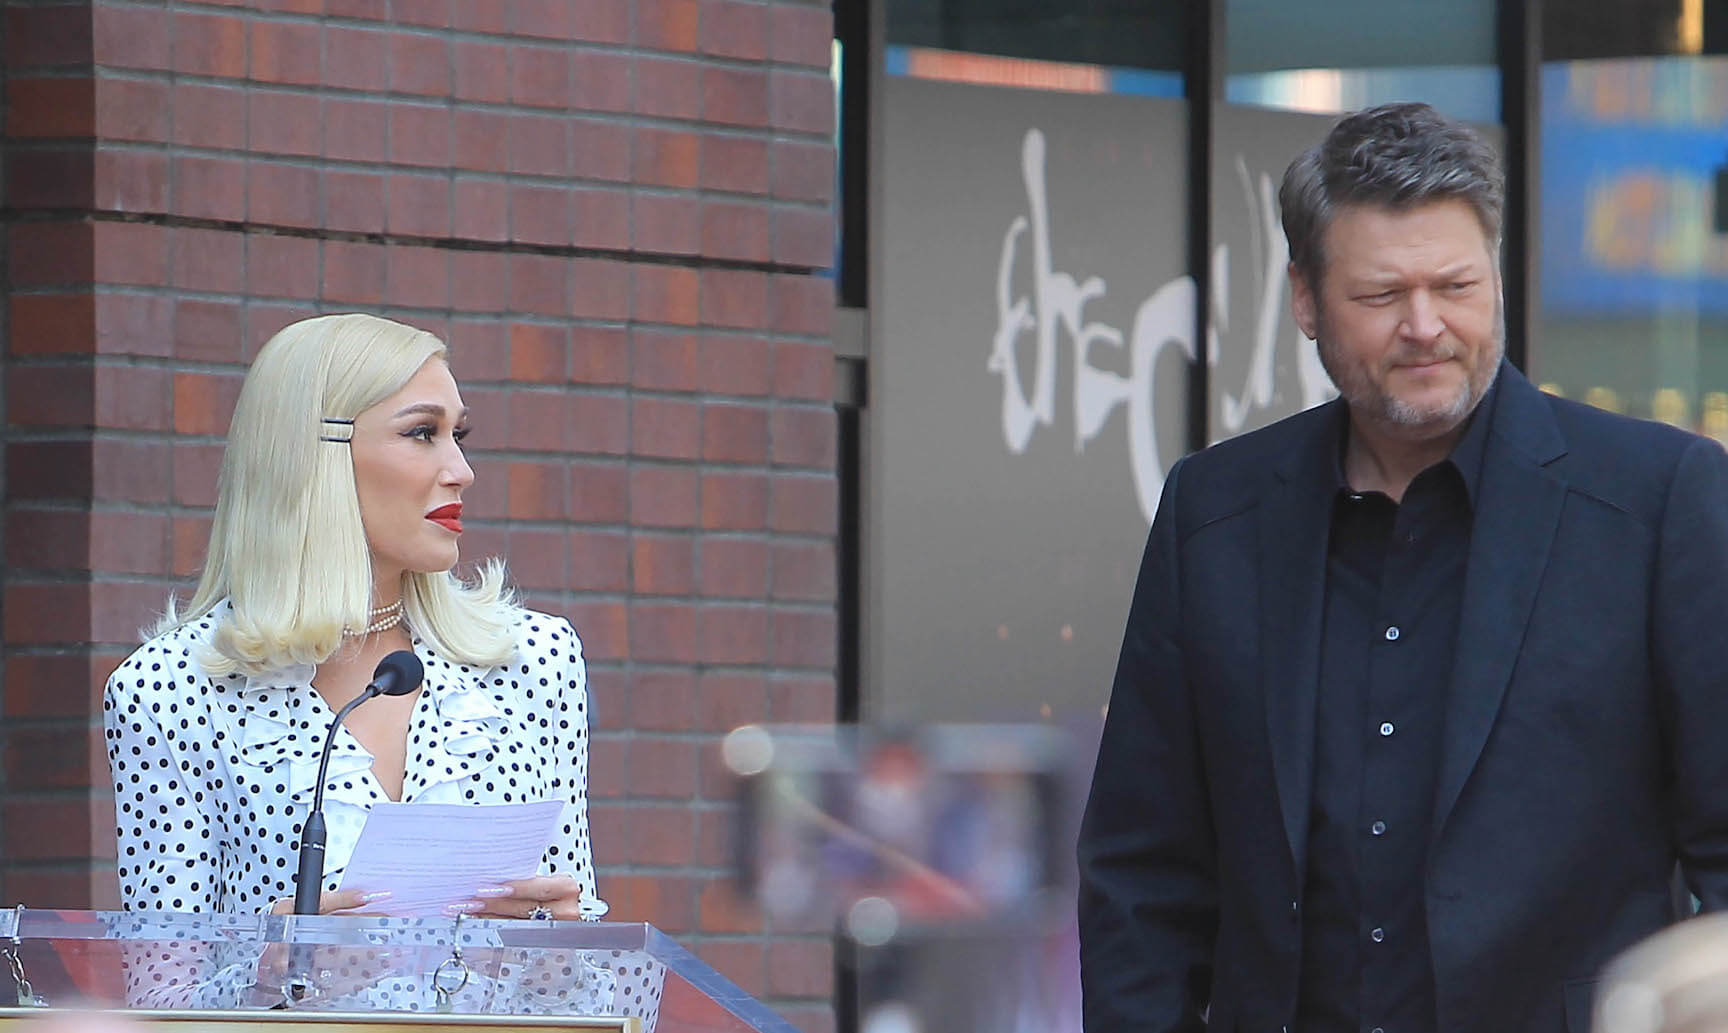 'The Voice' stars Gwen Stefani and Blake Shelton in Los Angeles. Stefani is speaking in front of an outdoor podium.